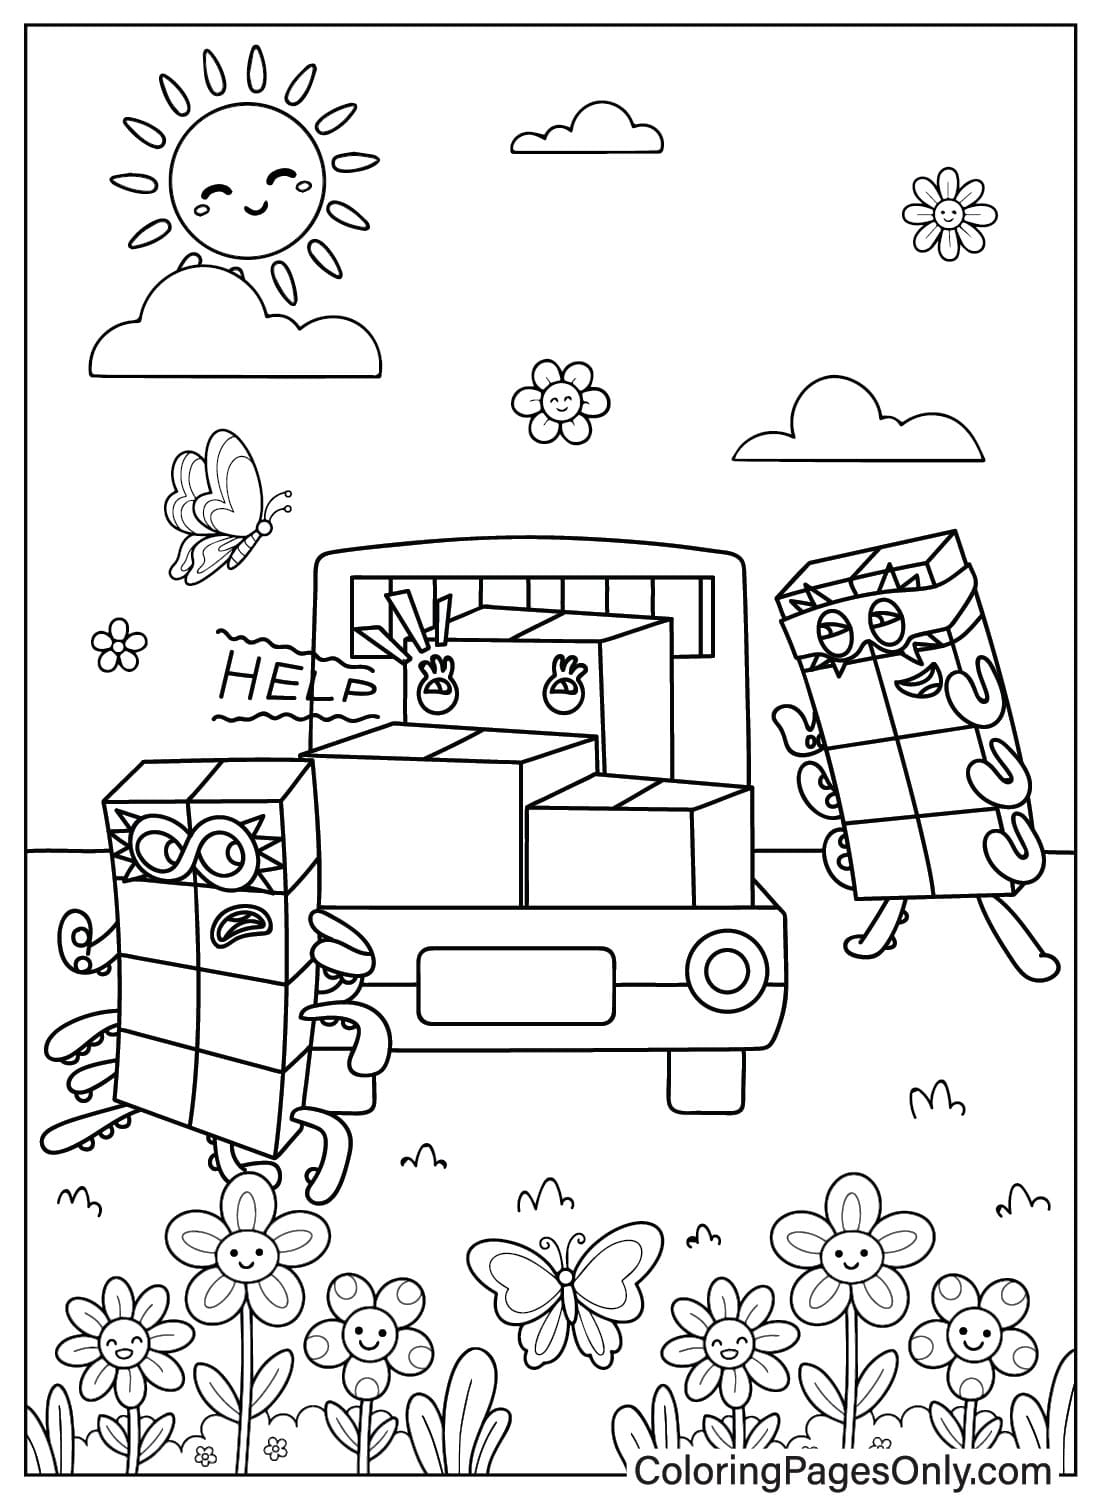 Free Numberblocks Coloring Page Coloring Page